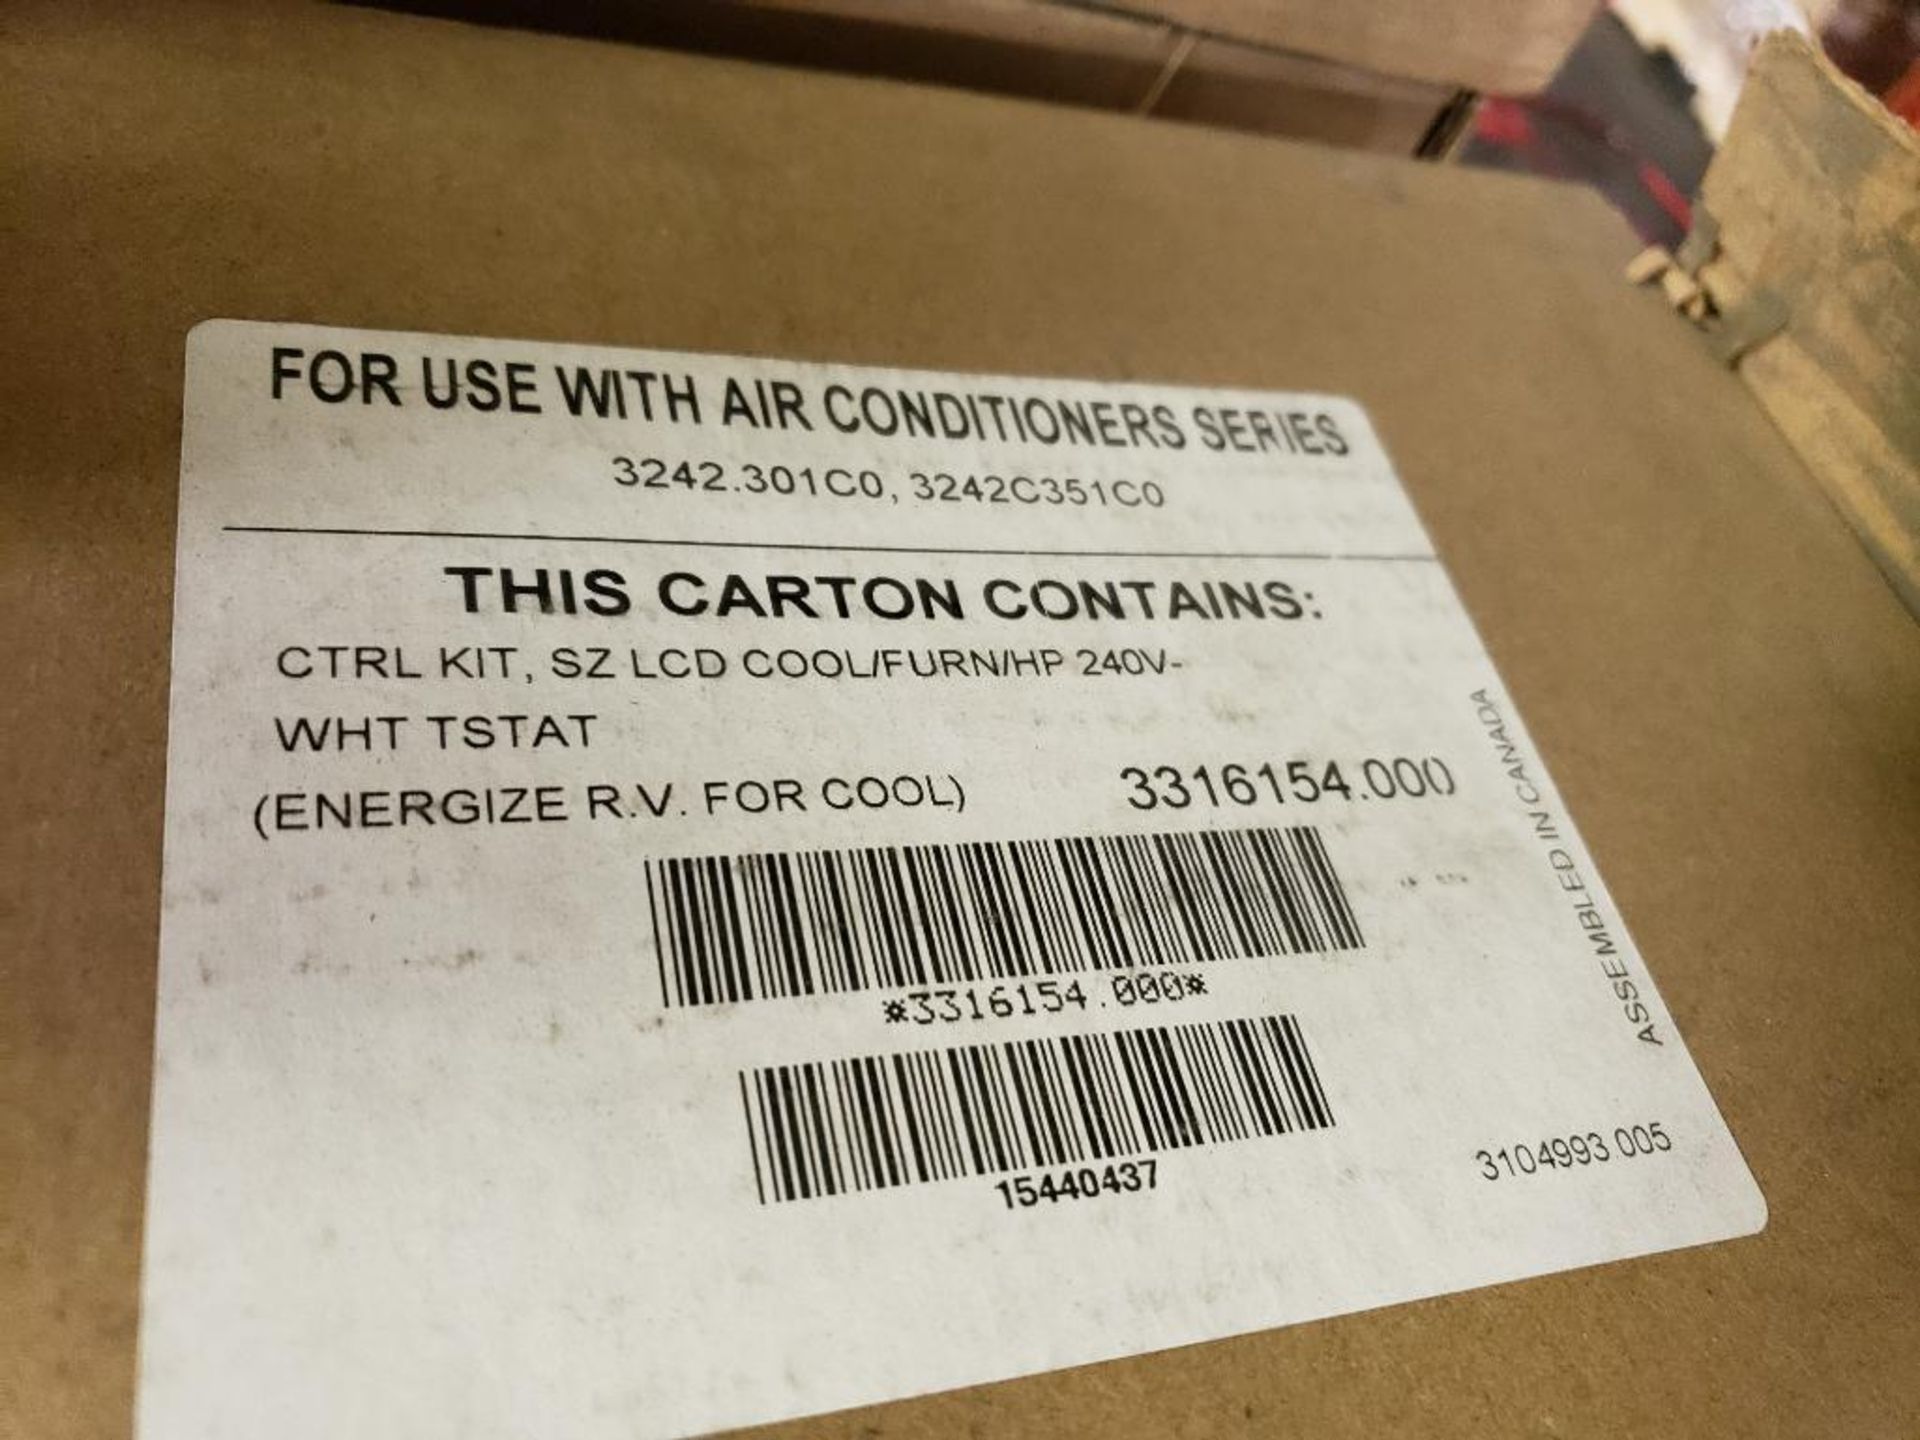 Qty 20 - Dometic air conditioner control. Part number 3316154.000. With Thermostat. New kit in box. - Image 2 of 3